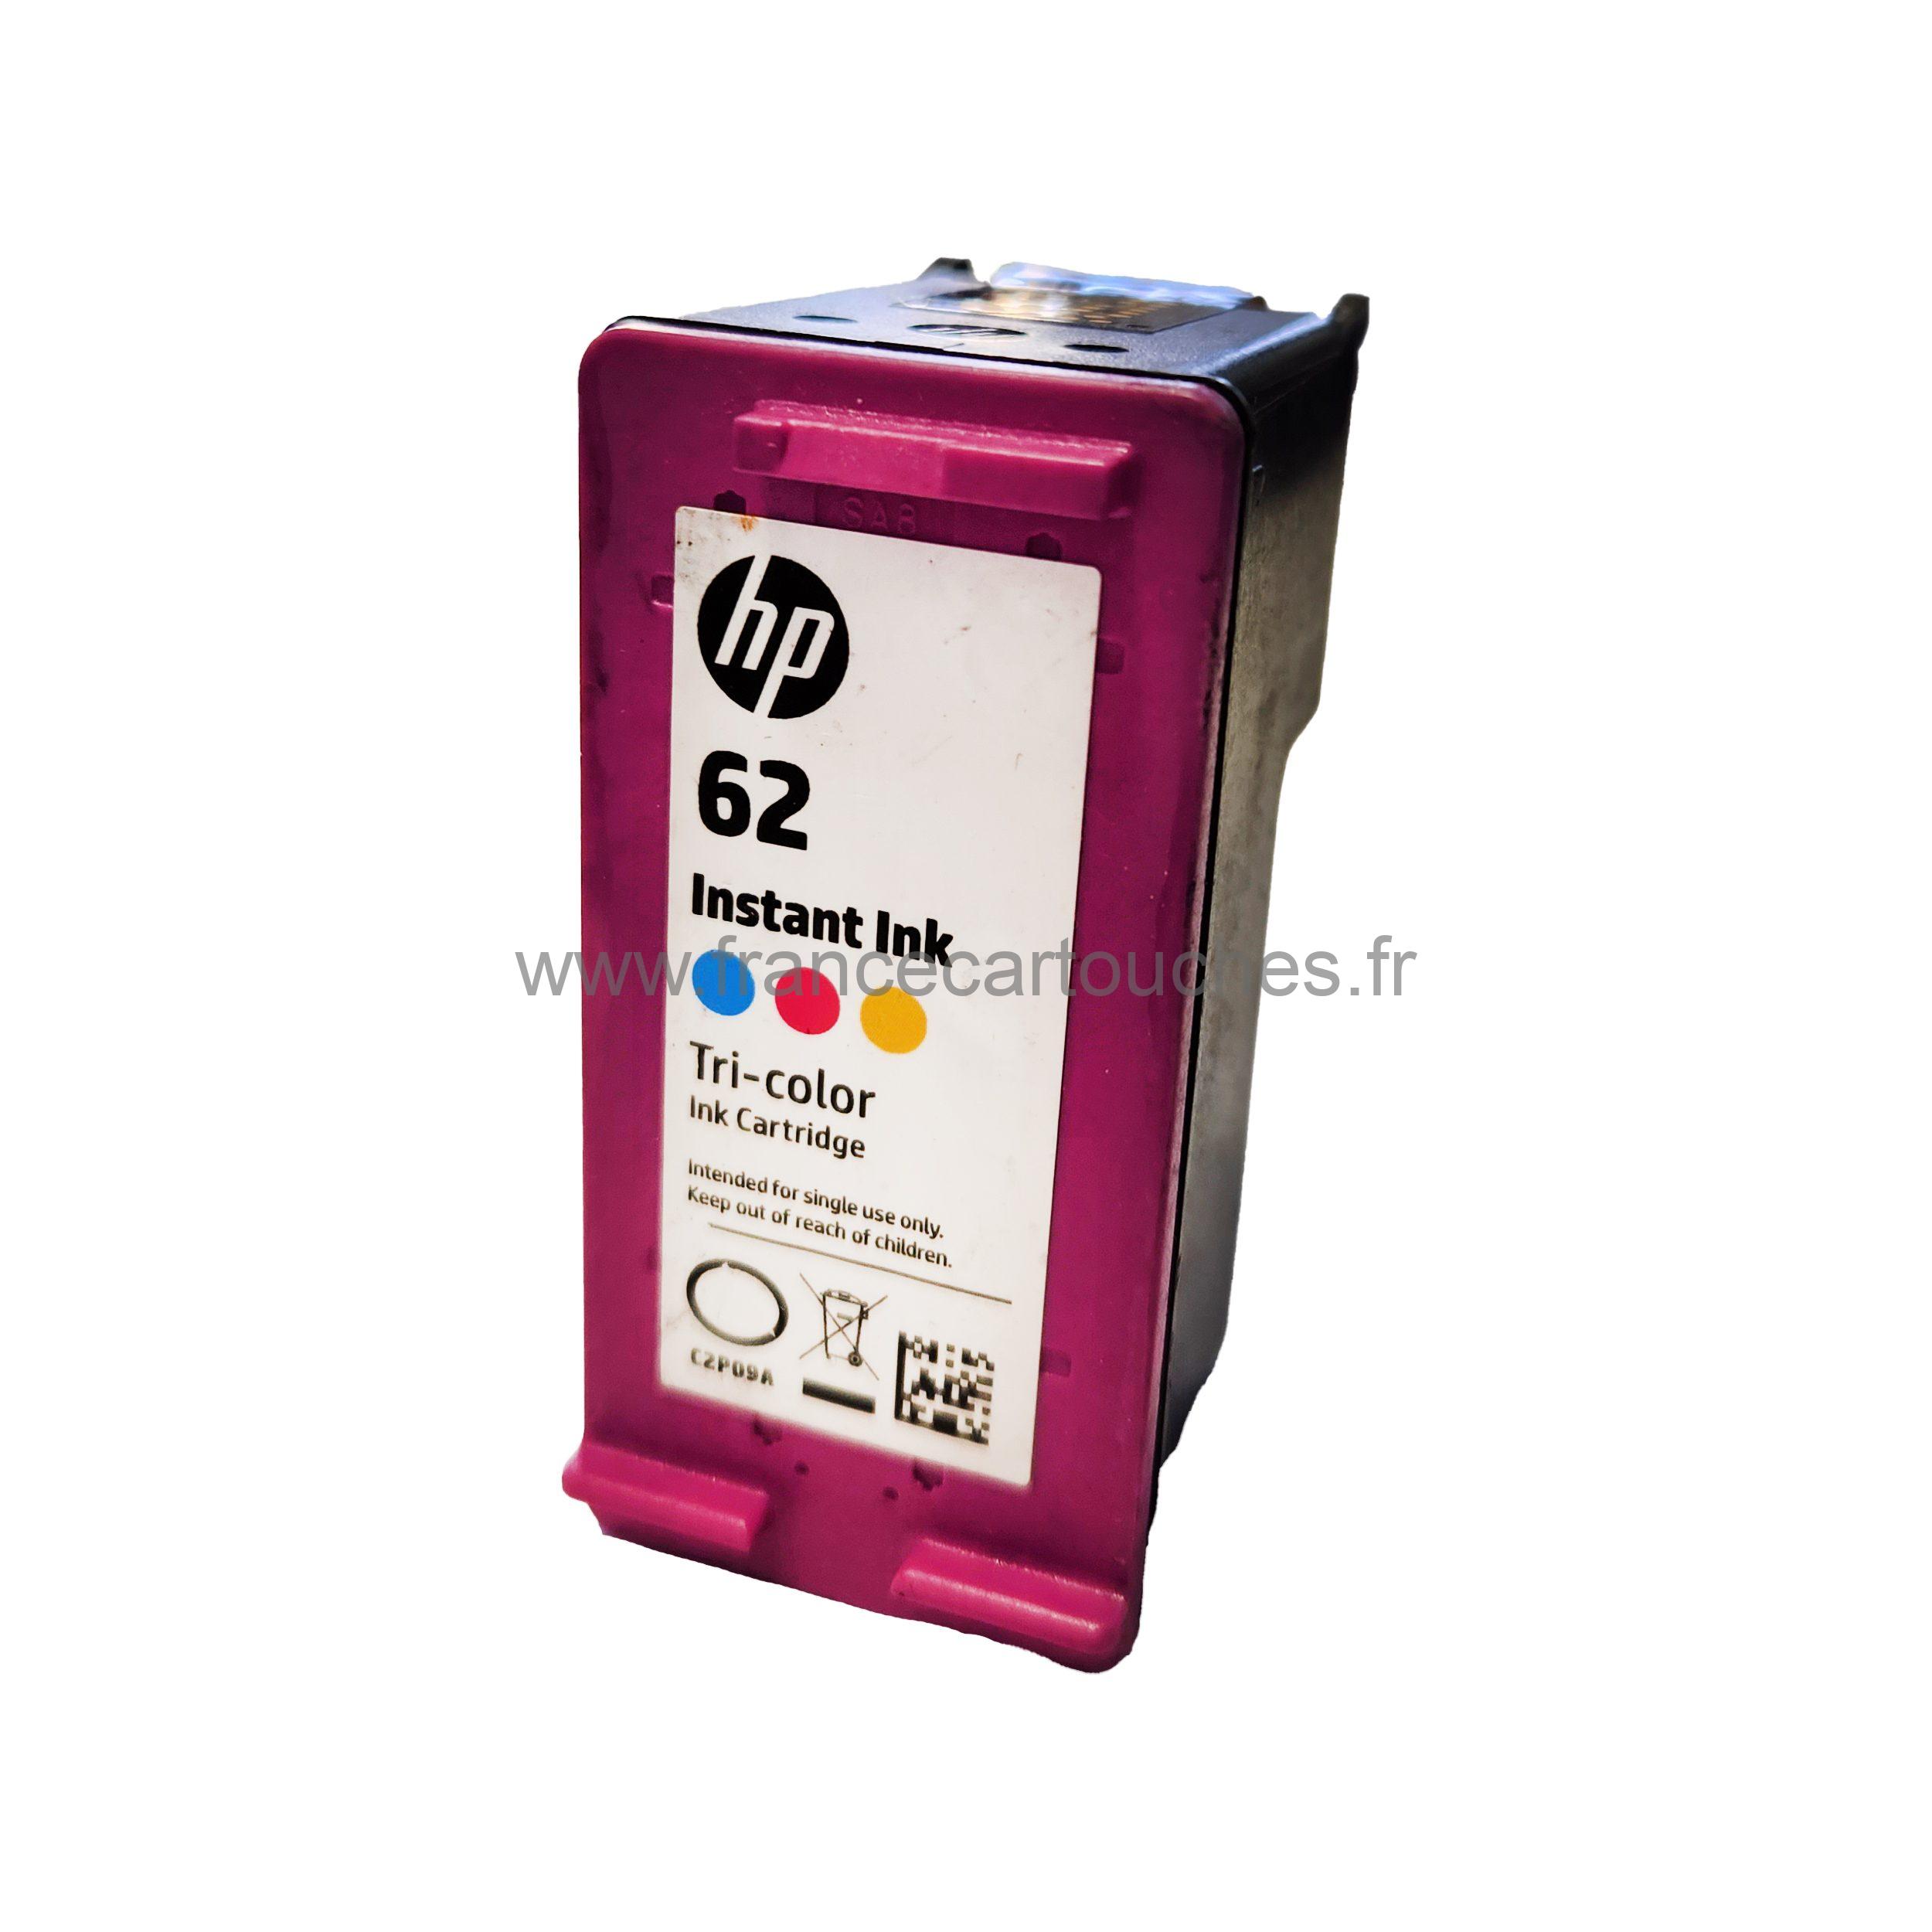 HP N°62 “longue” Instant Ink (réf HP C2P09A) – France Cartouches